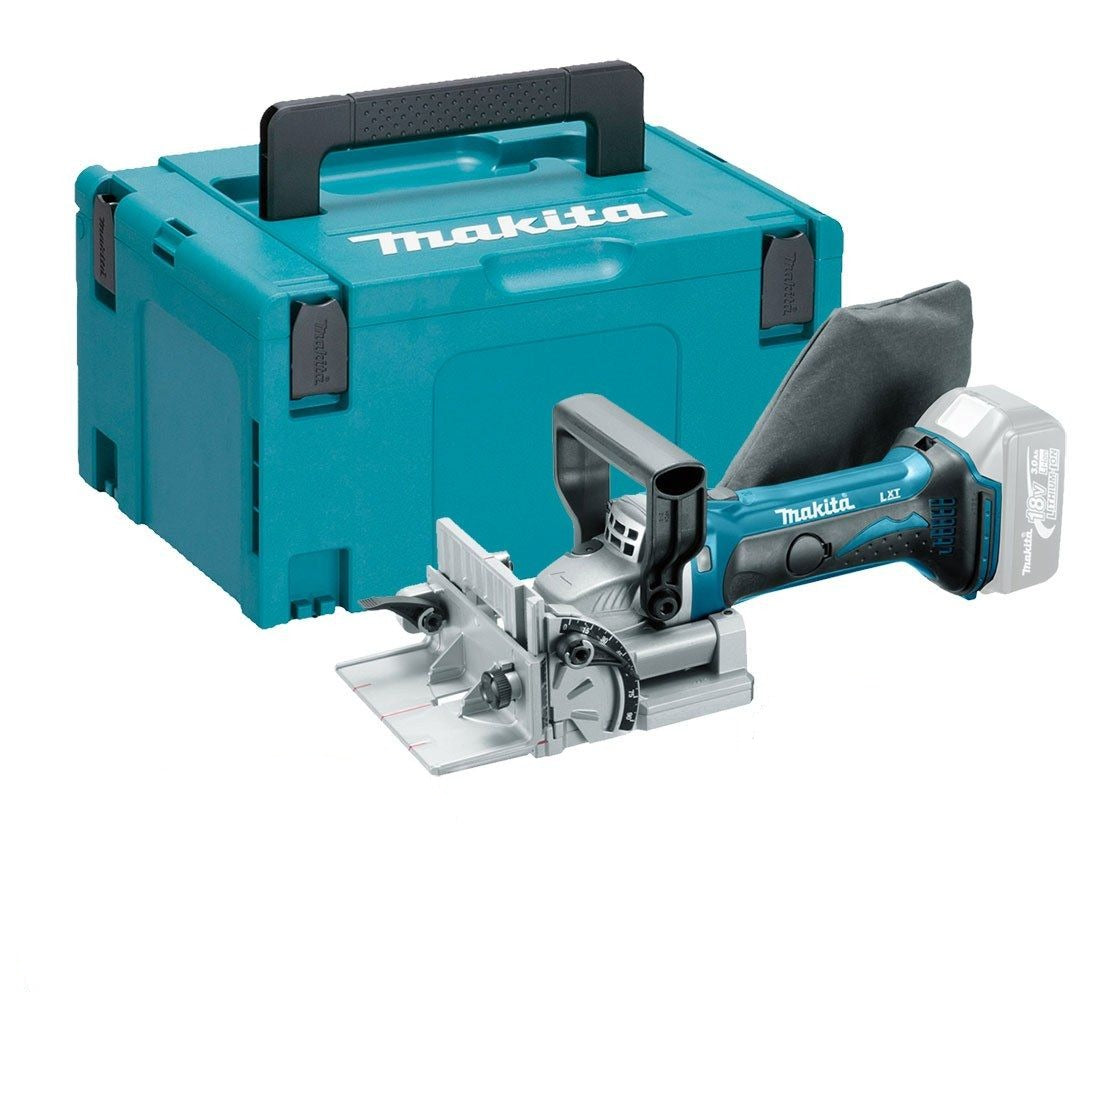 Makita 18V Cordless Biscuit Joiner DPJ180ZJ Solo Power Tool Services